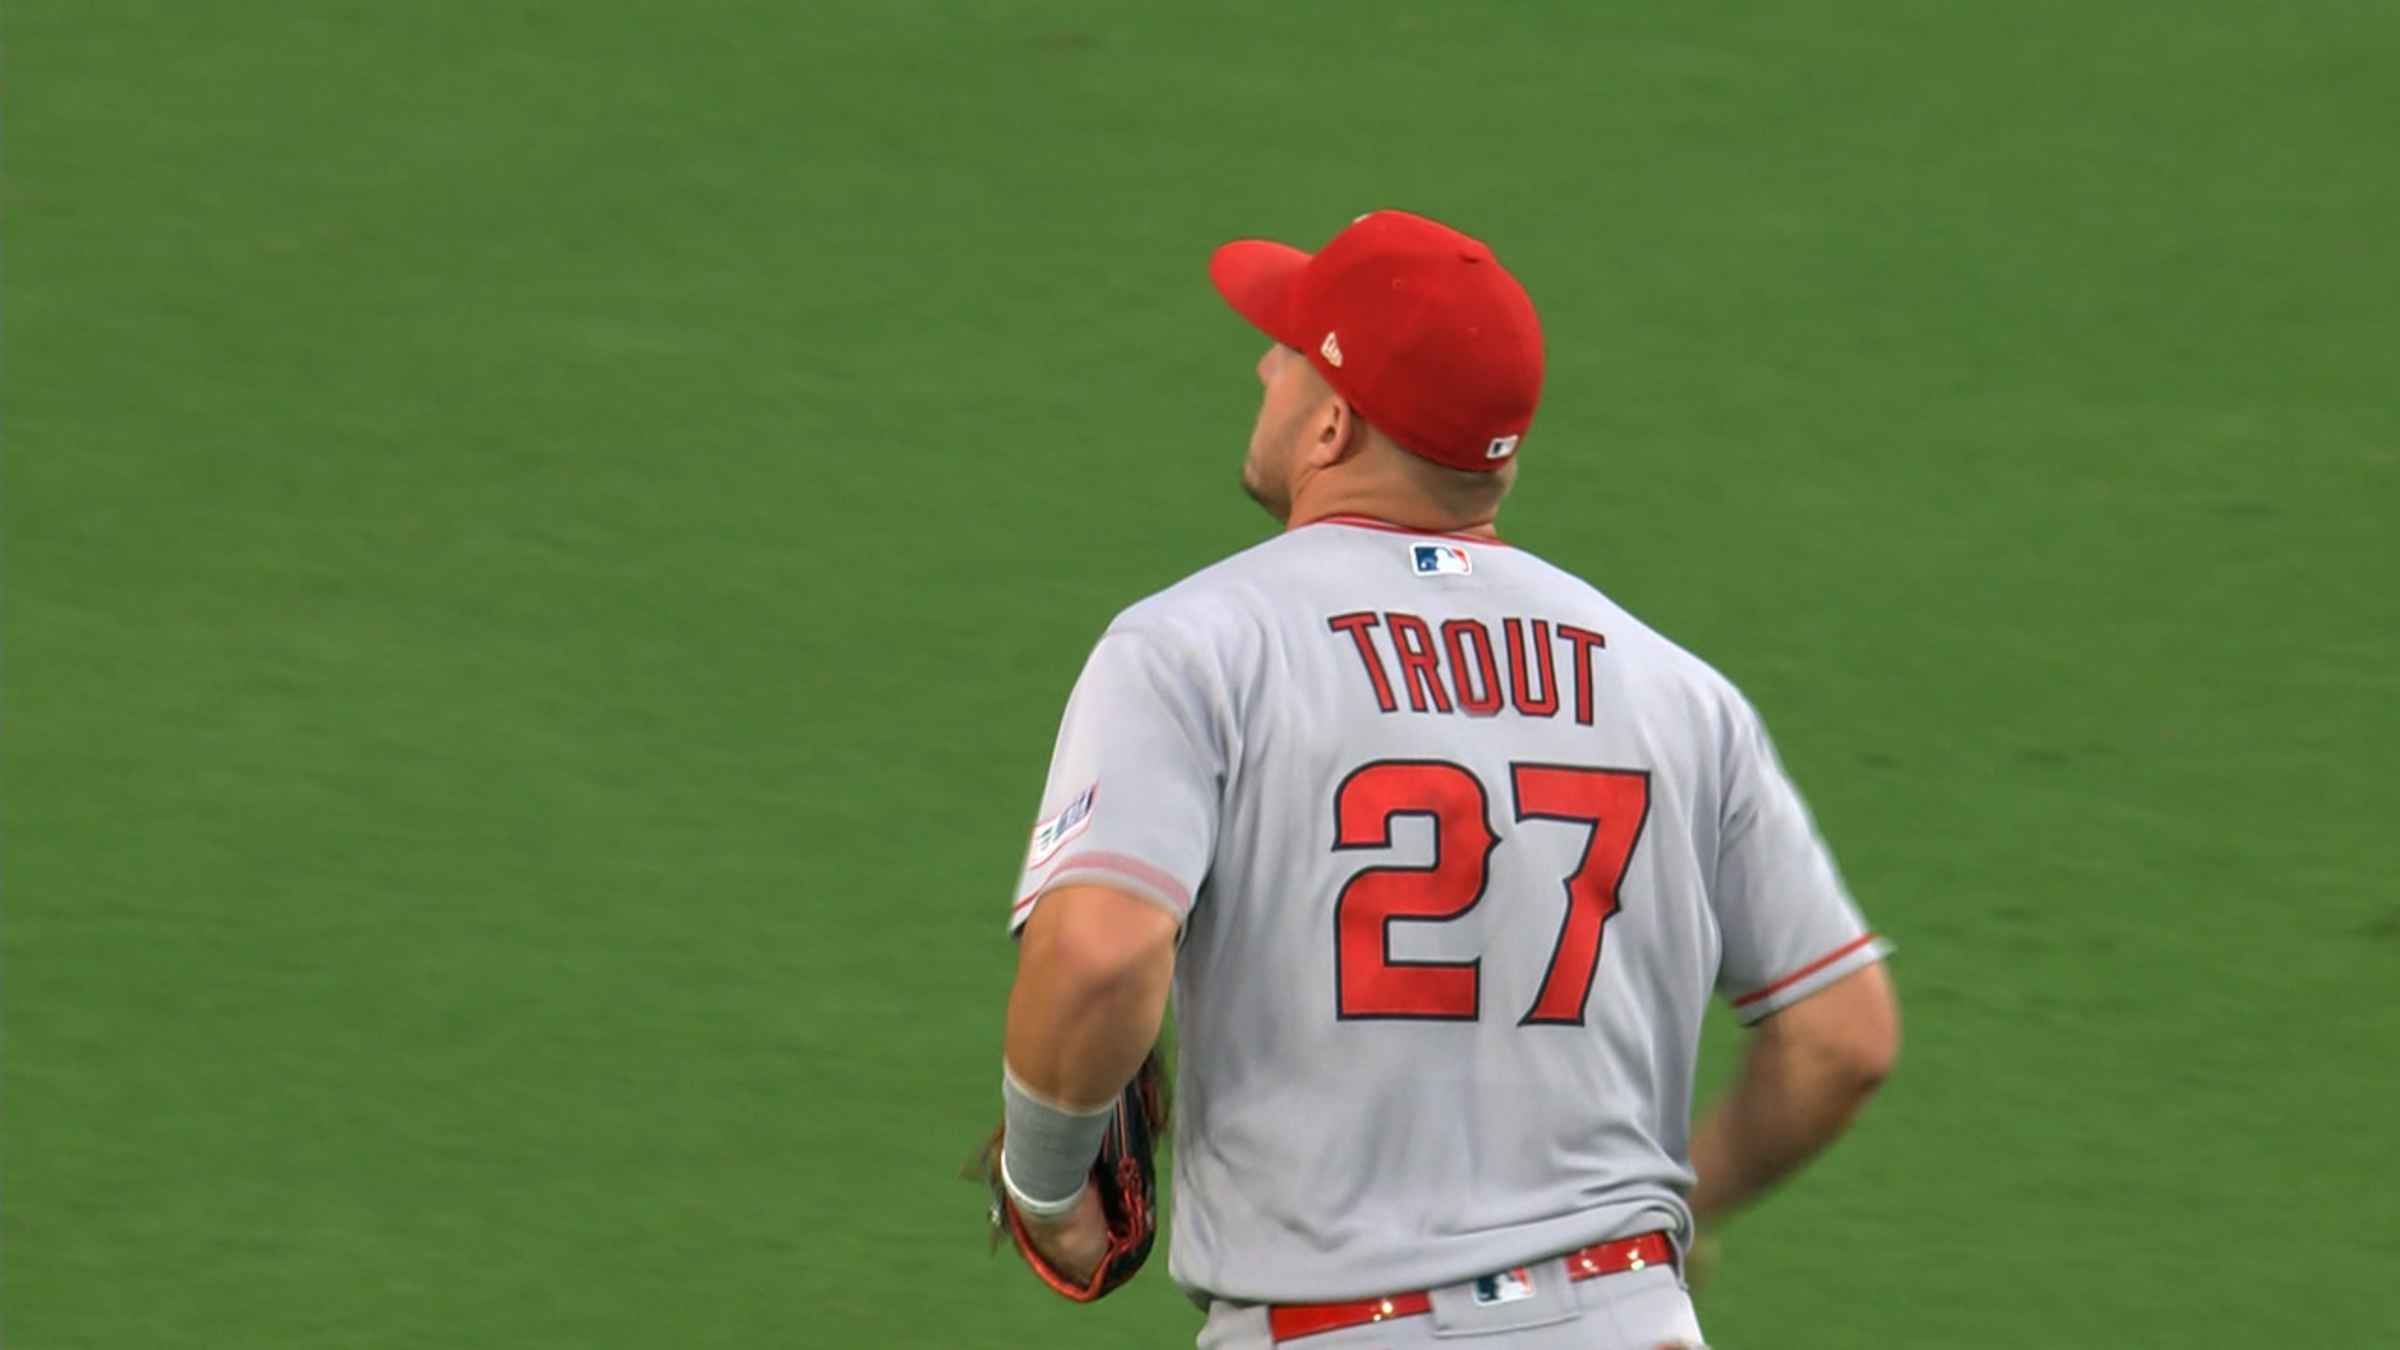 Mike Trout Minor League Baseball Fan Apparel and Souvenirs for